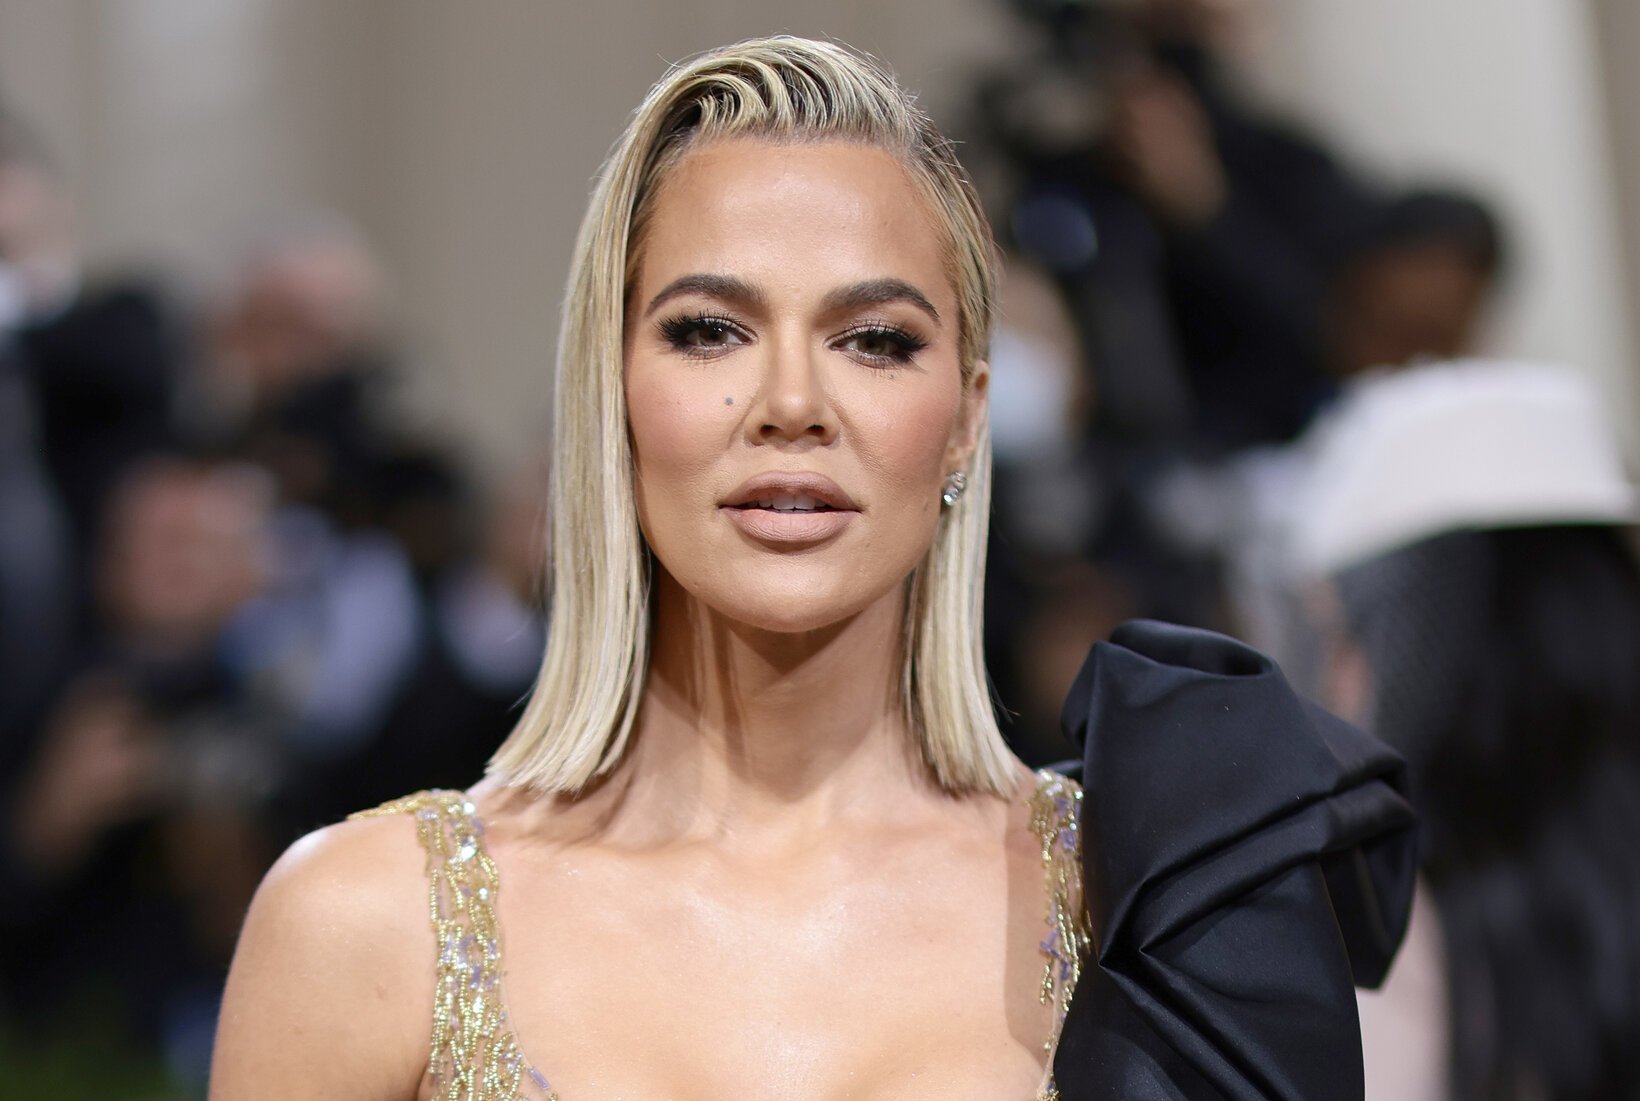 Khloé Kardashian Explains Why She’s ‘Always on Guard These Days’ — ‘I Miss the Old Me’